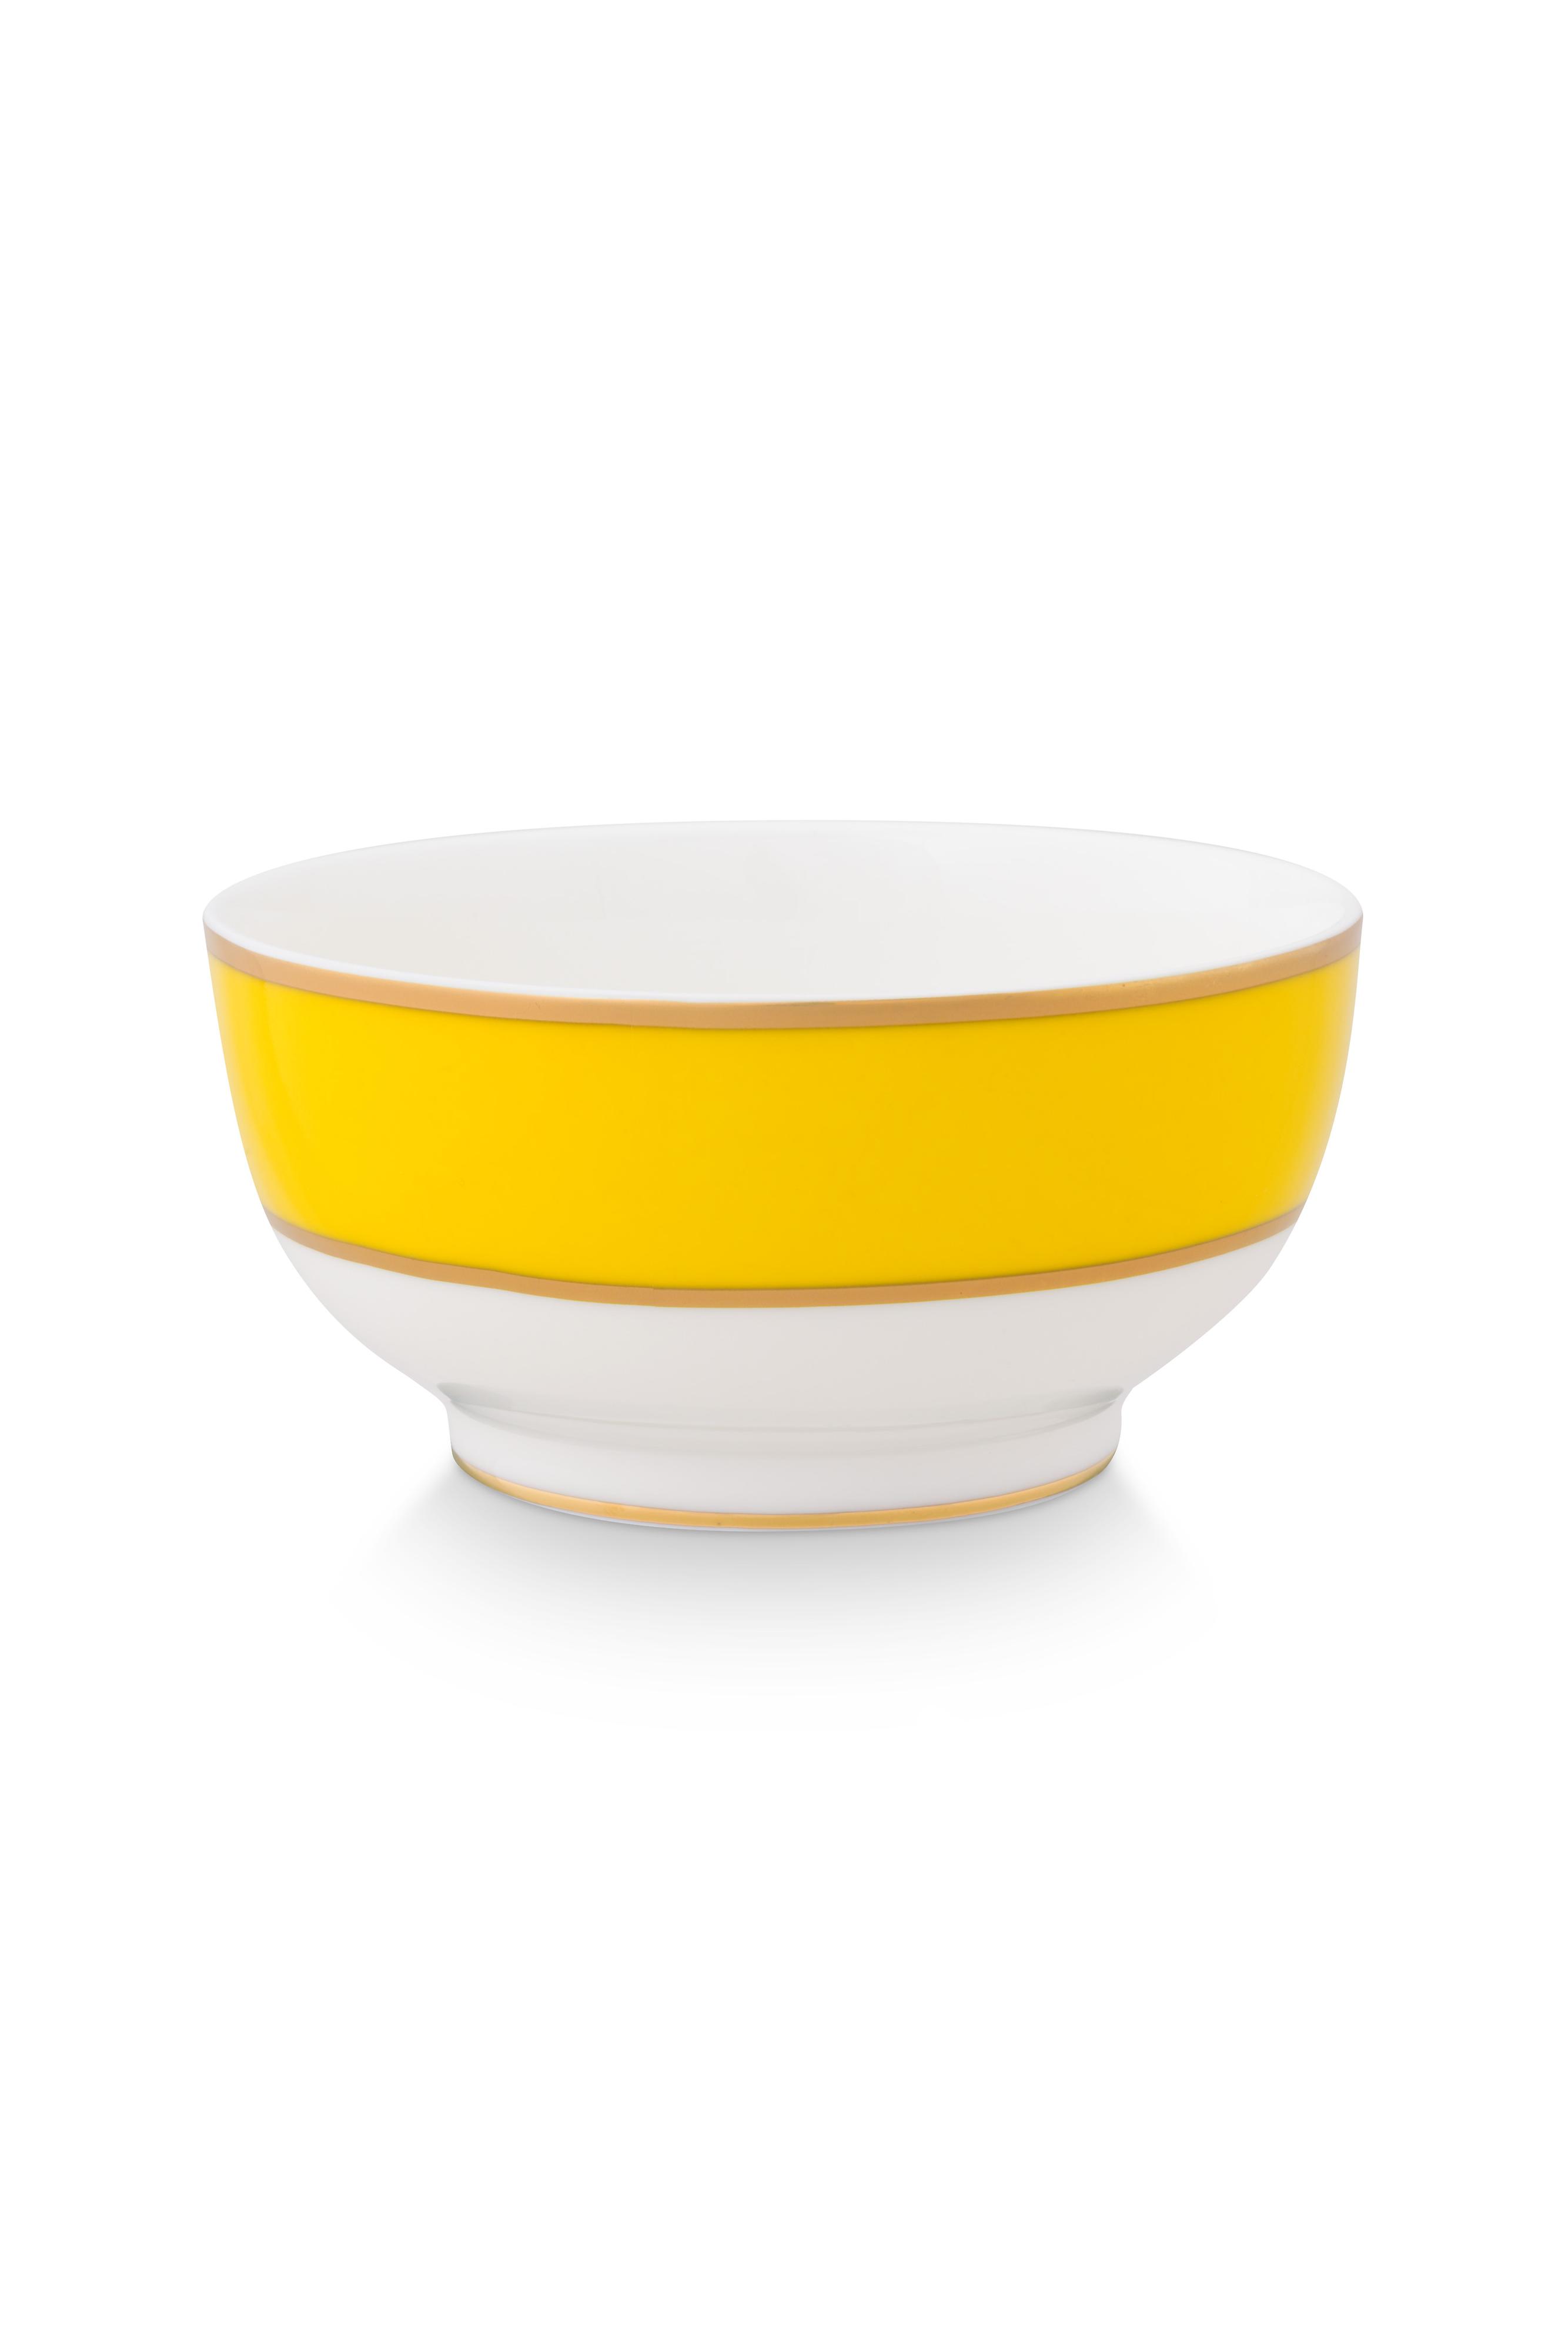 Bowl Pip Chique Gold-yellow 11.5cm Gift